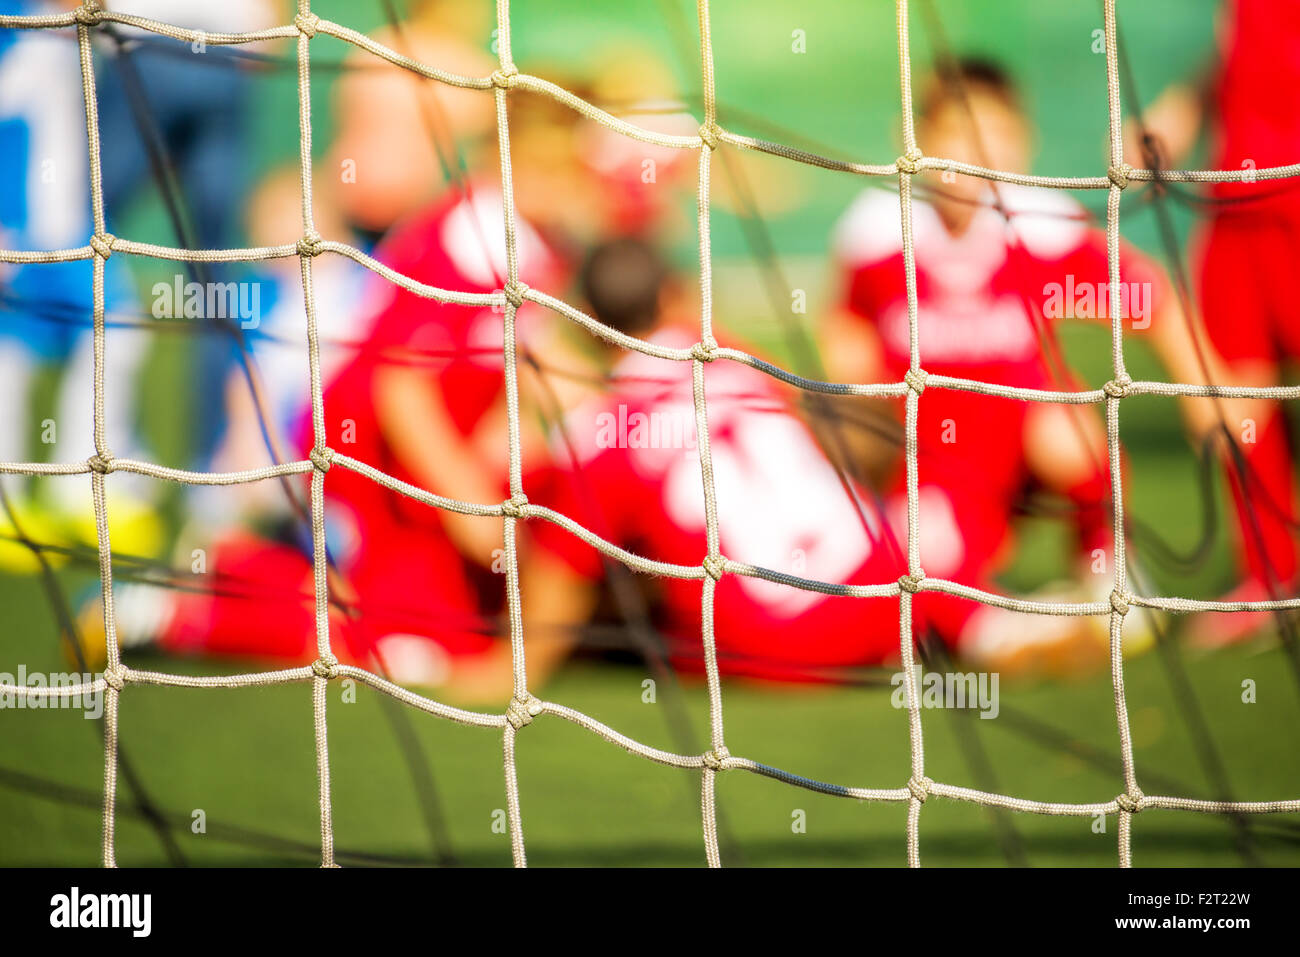 Kids soccer team celebrate goal and victory, defocussed blur sport background image Stock Photo